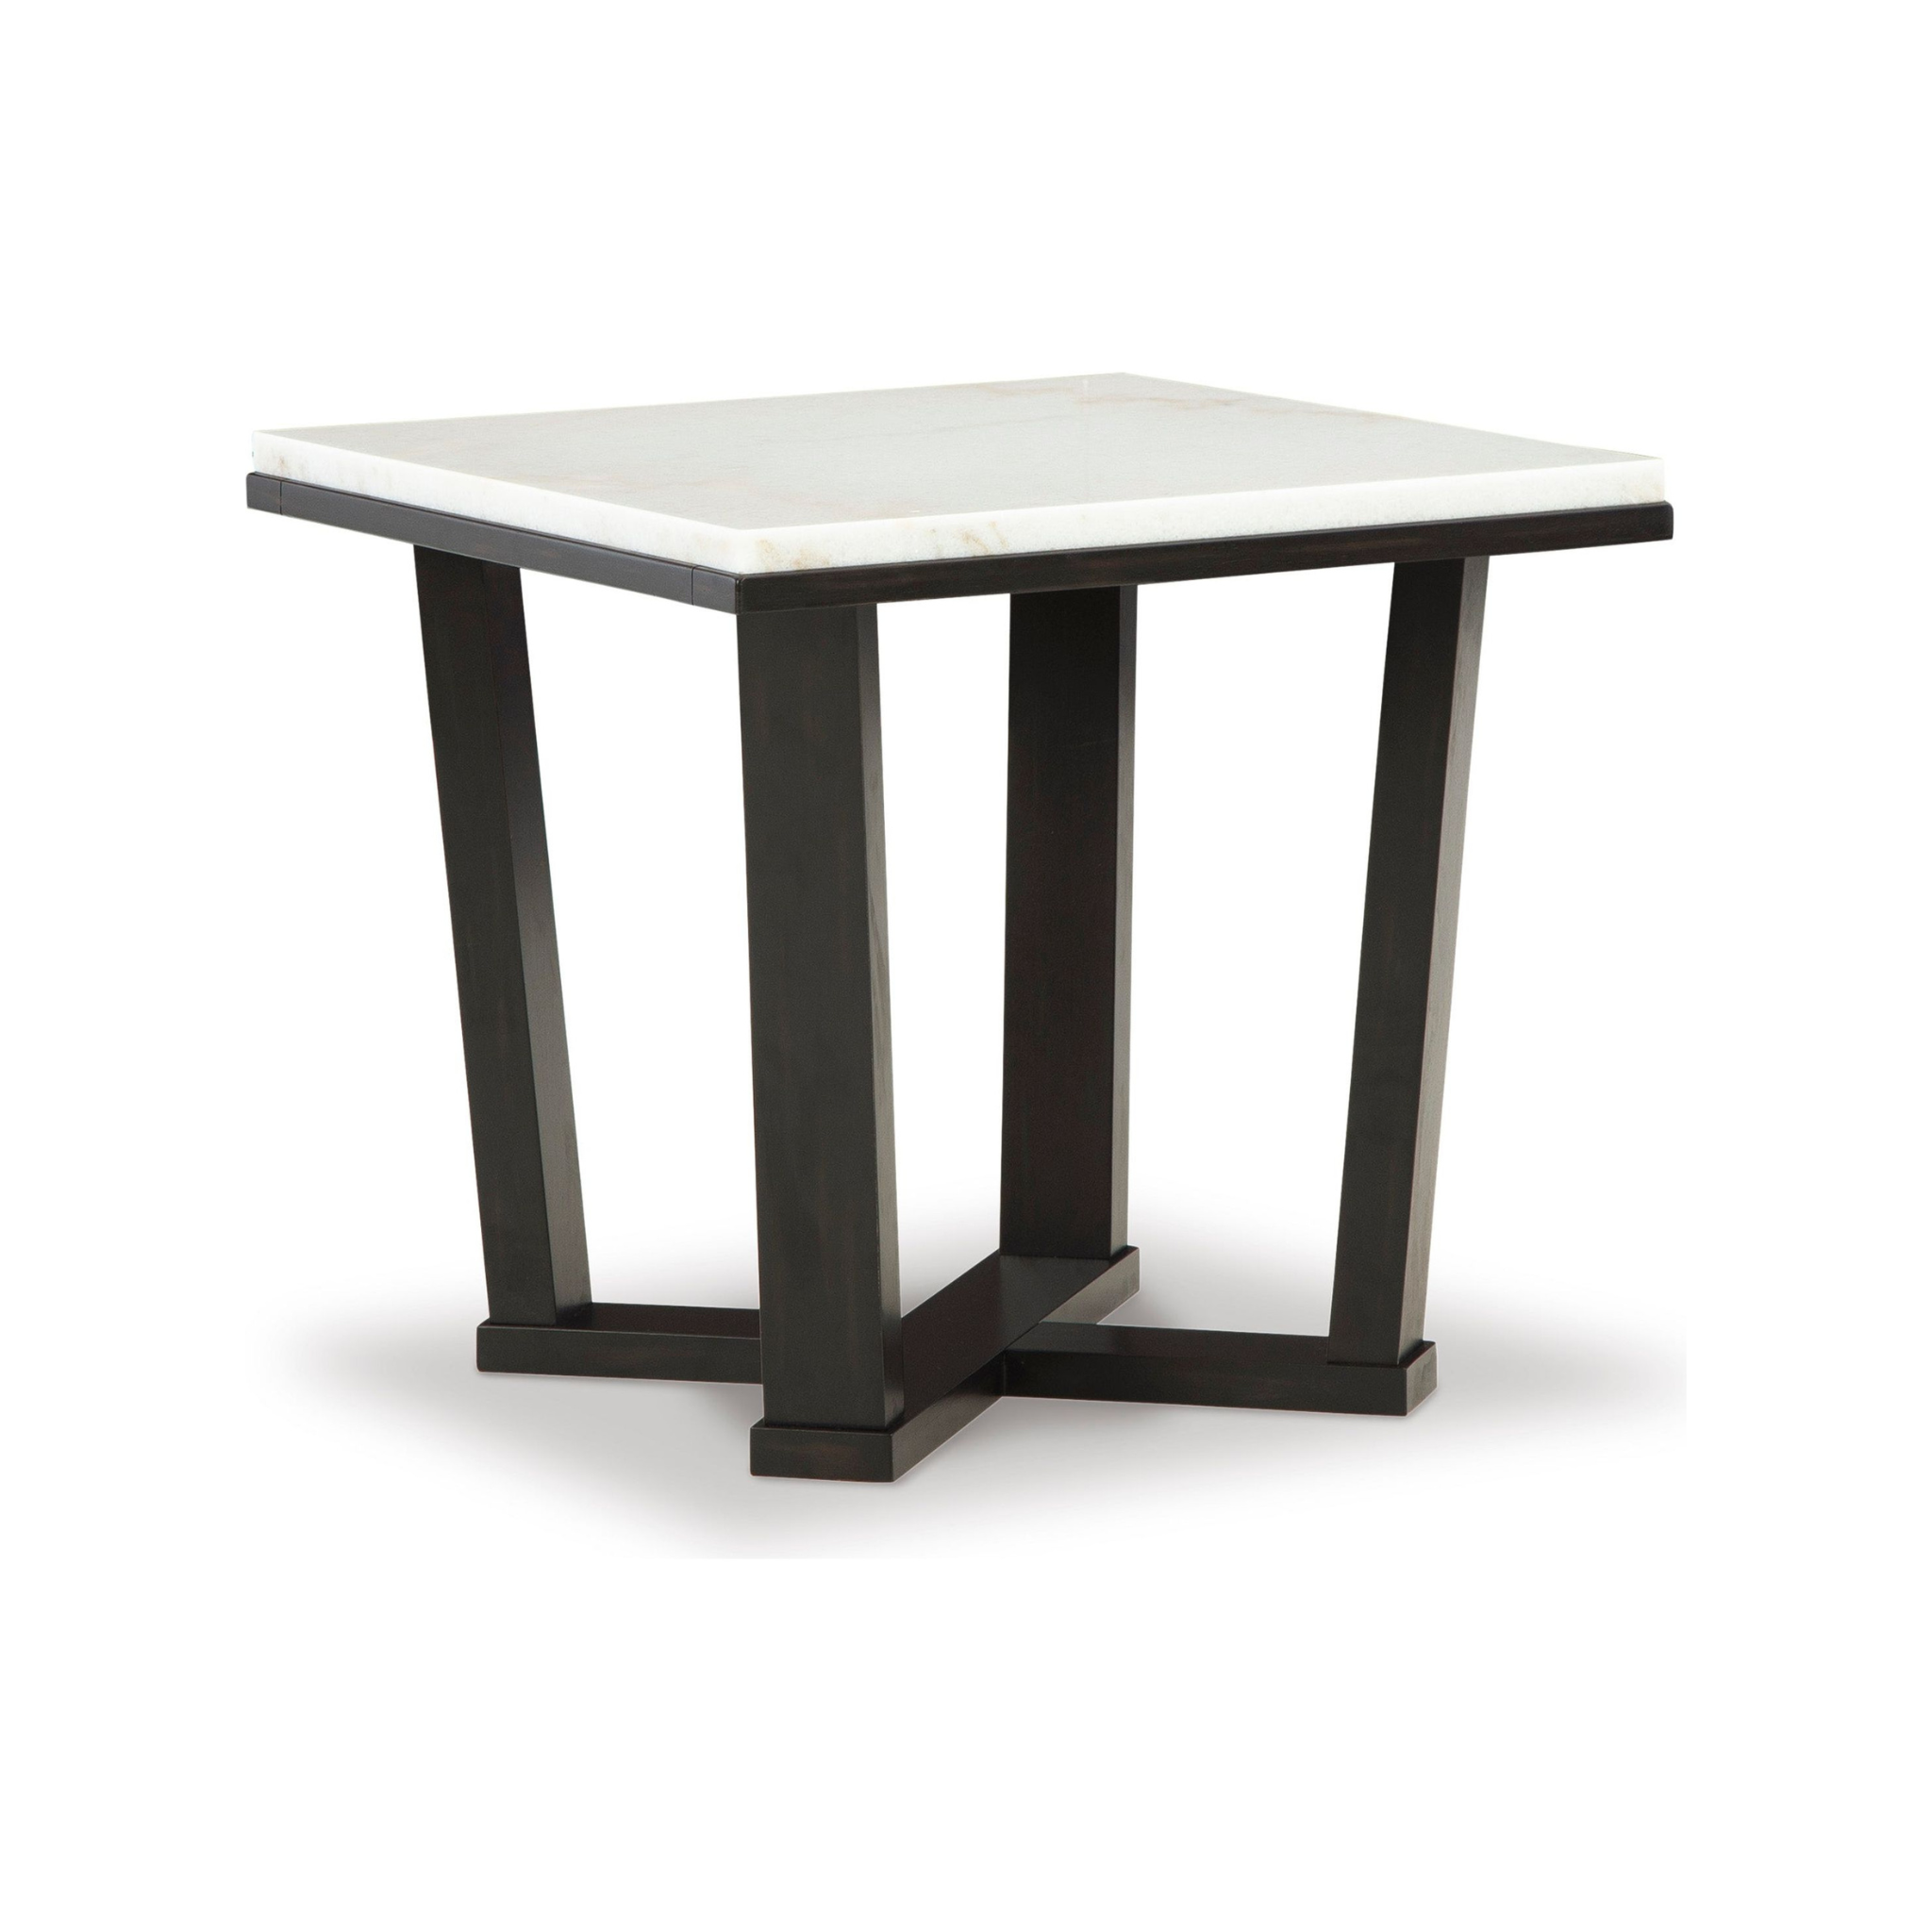 Fostead End Table